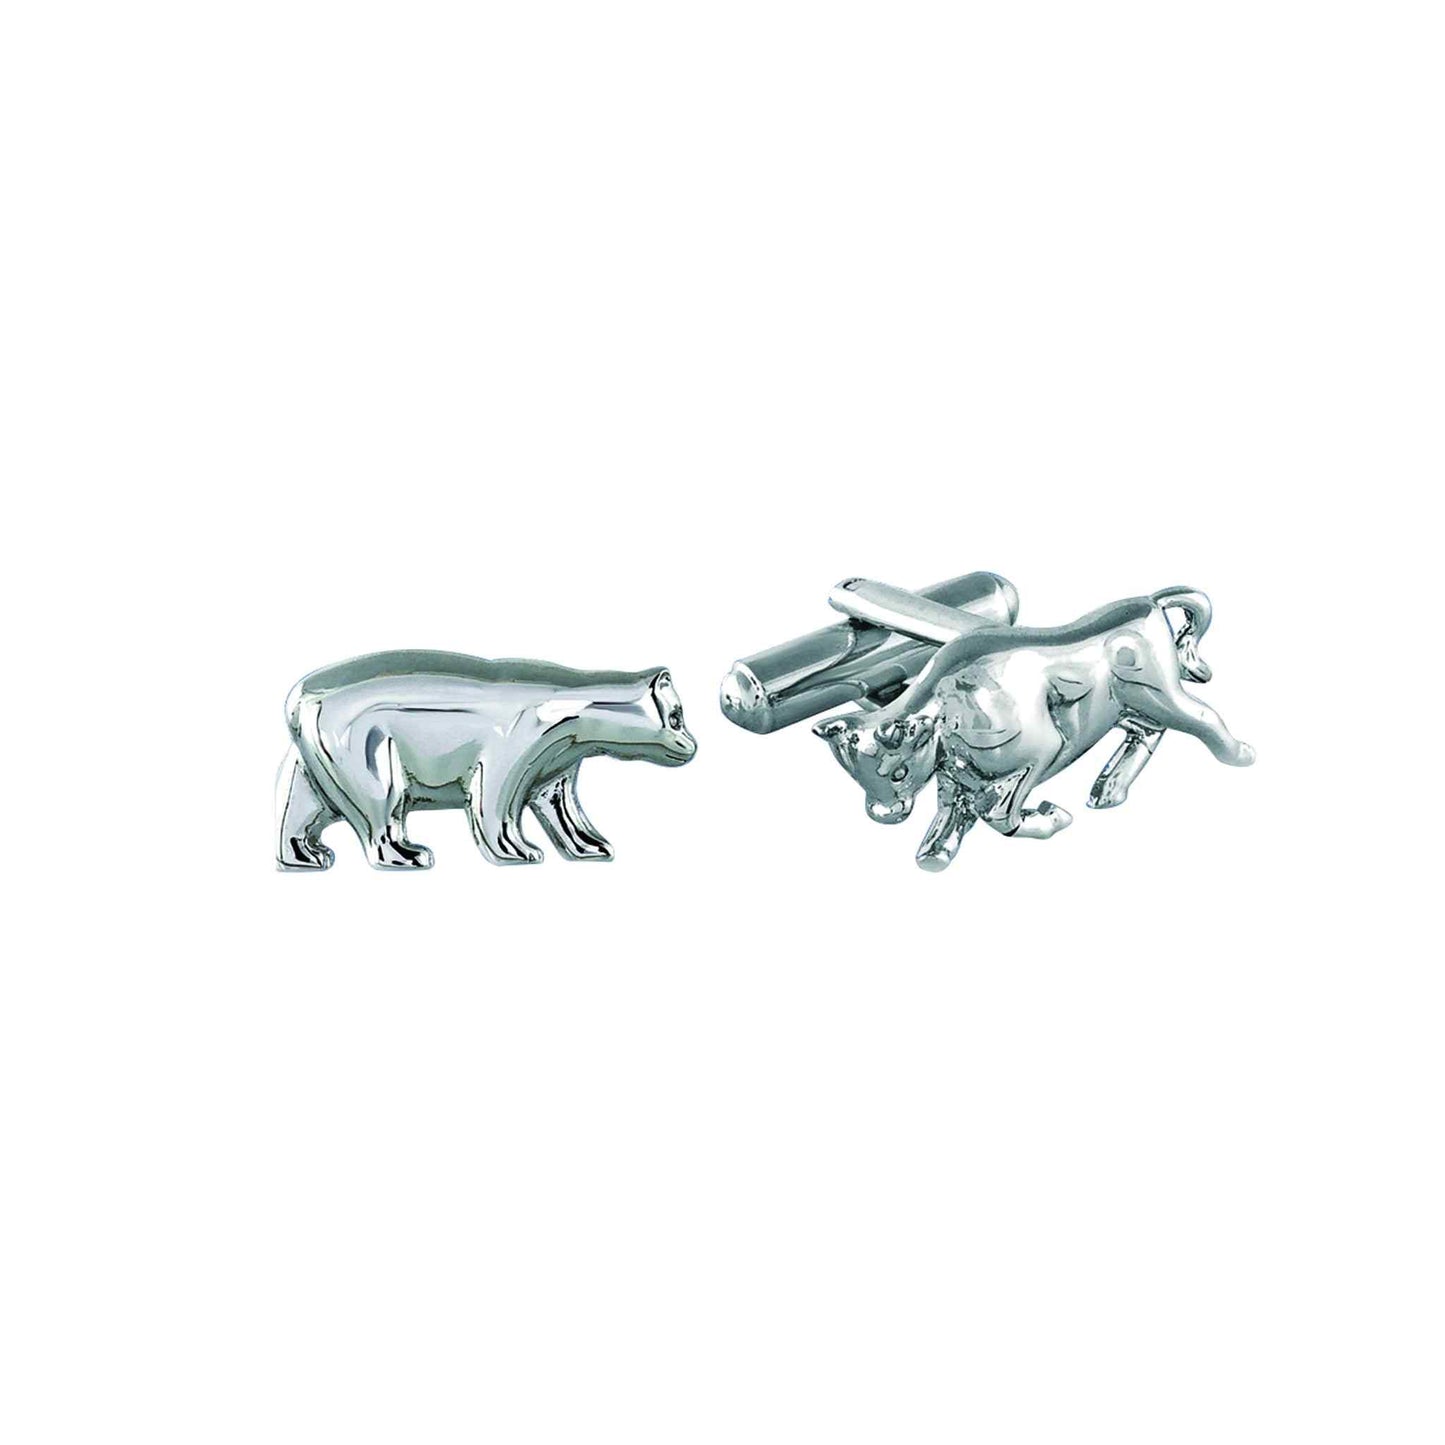 A sterling silver bull & bear cufflinks displayed on a neutral white background.